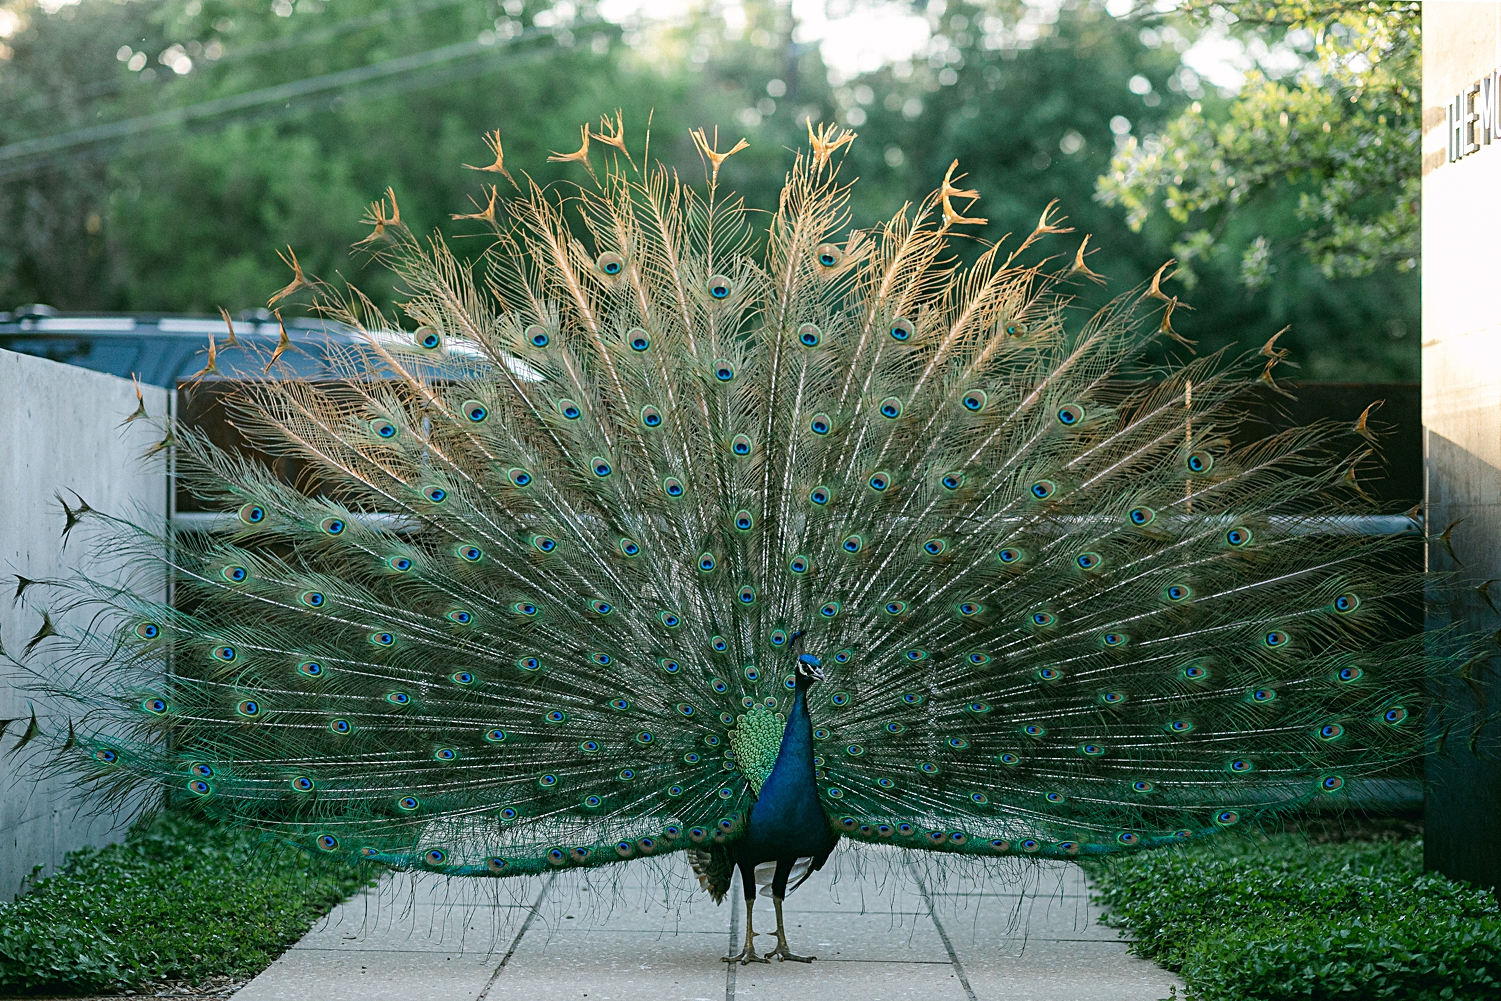 Peacock with feathers spread green and blue